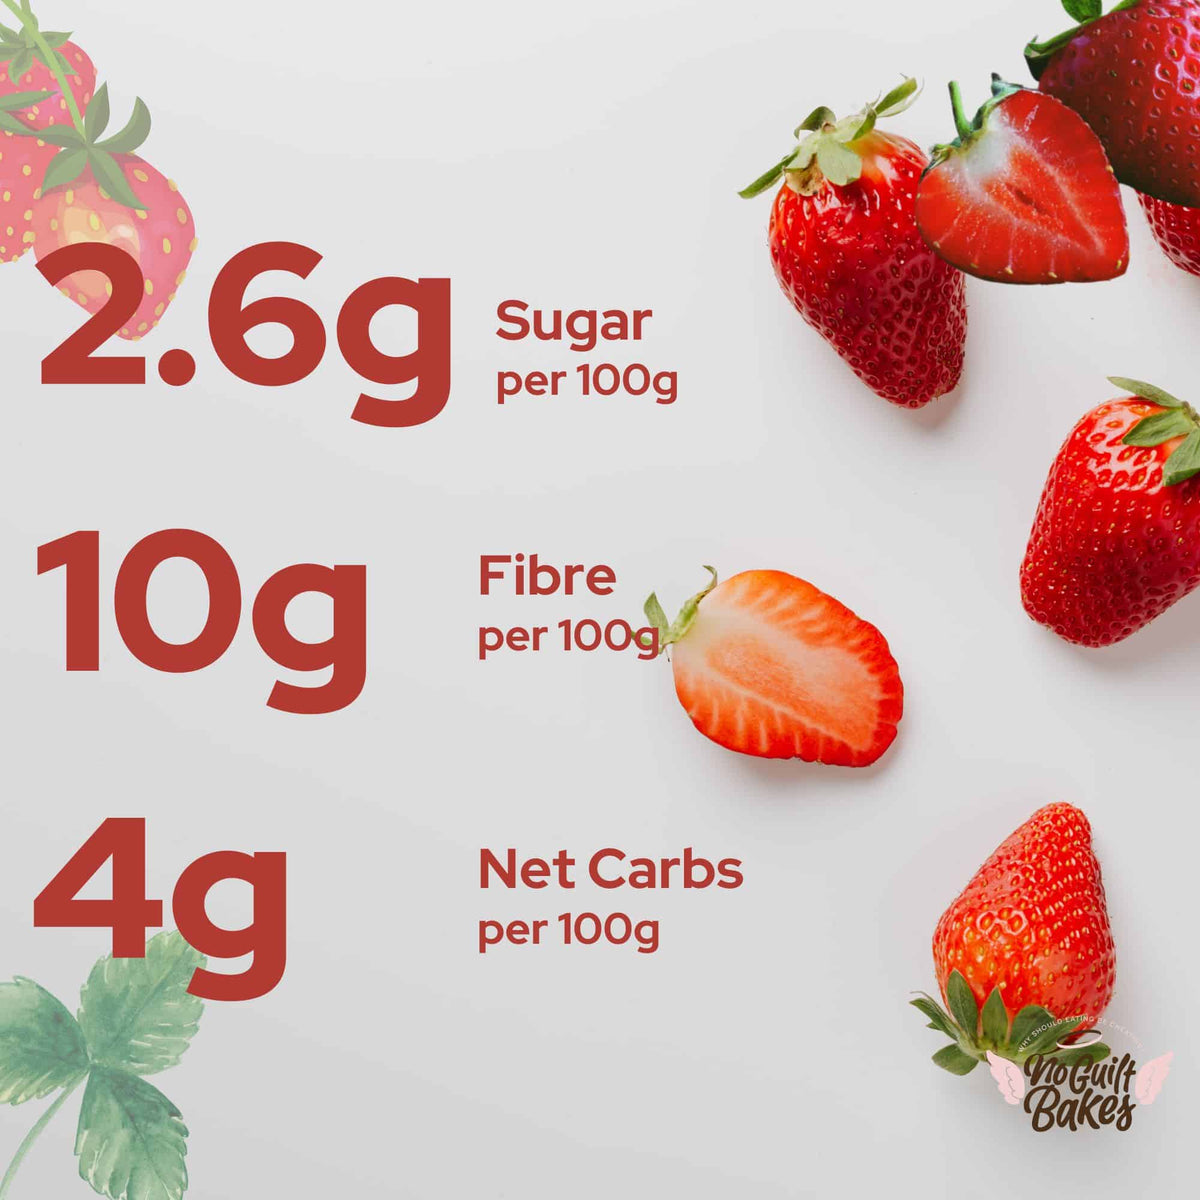 Indulge in our tea-time trio of Summer Loaves Bundle by No Guilt Bakes. This delightful treat is the perfect combination of sweet strawberries and sugar, while still keeping your carb intake in check with just